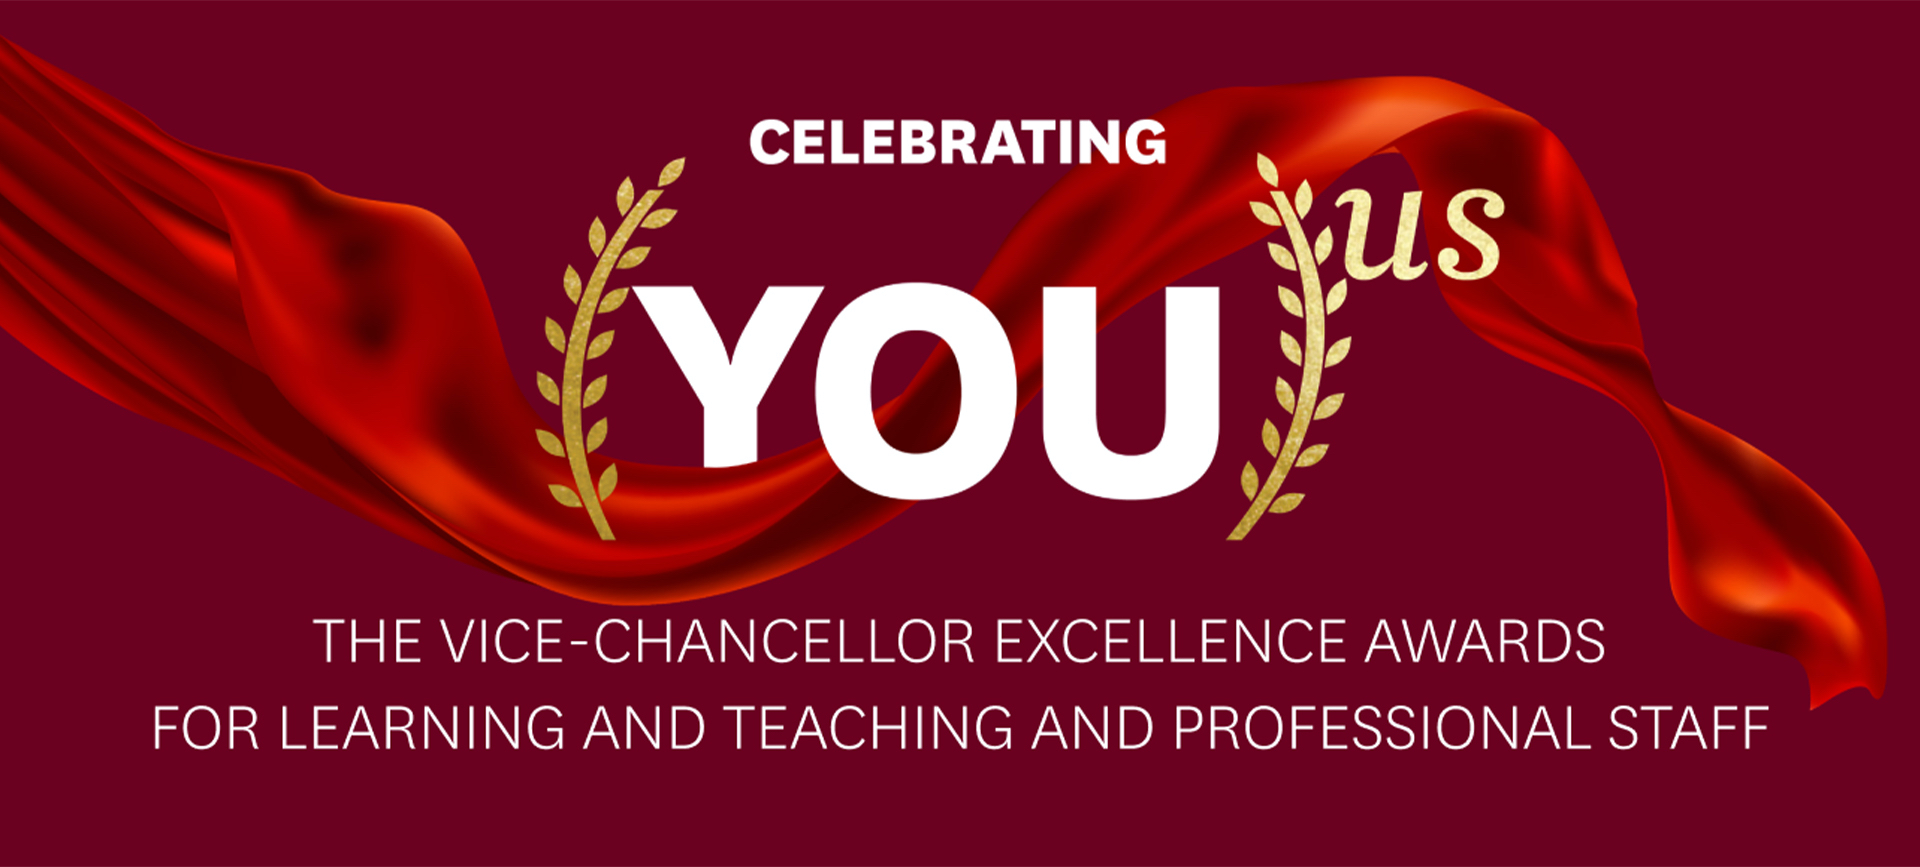 introducing-the-vice-chancellors-excellence-awards_wp_1920x867under1mb